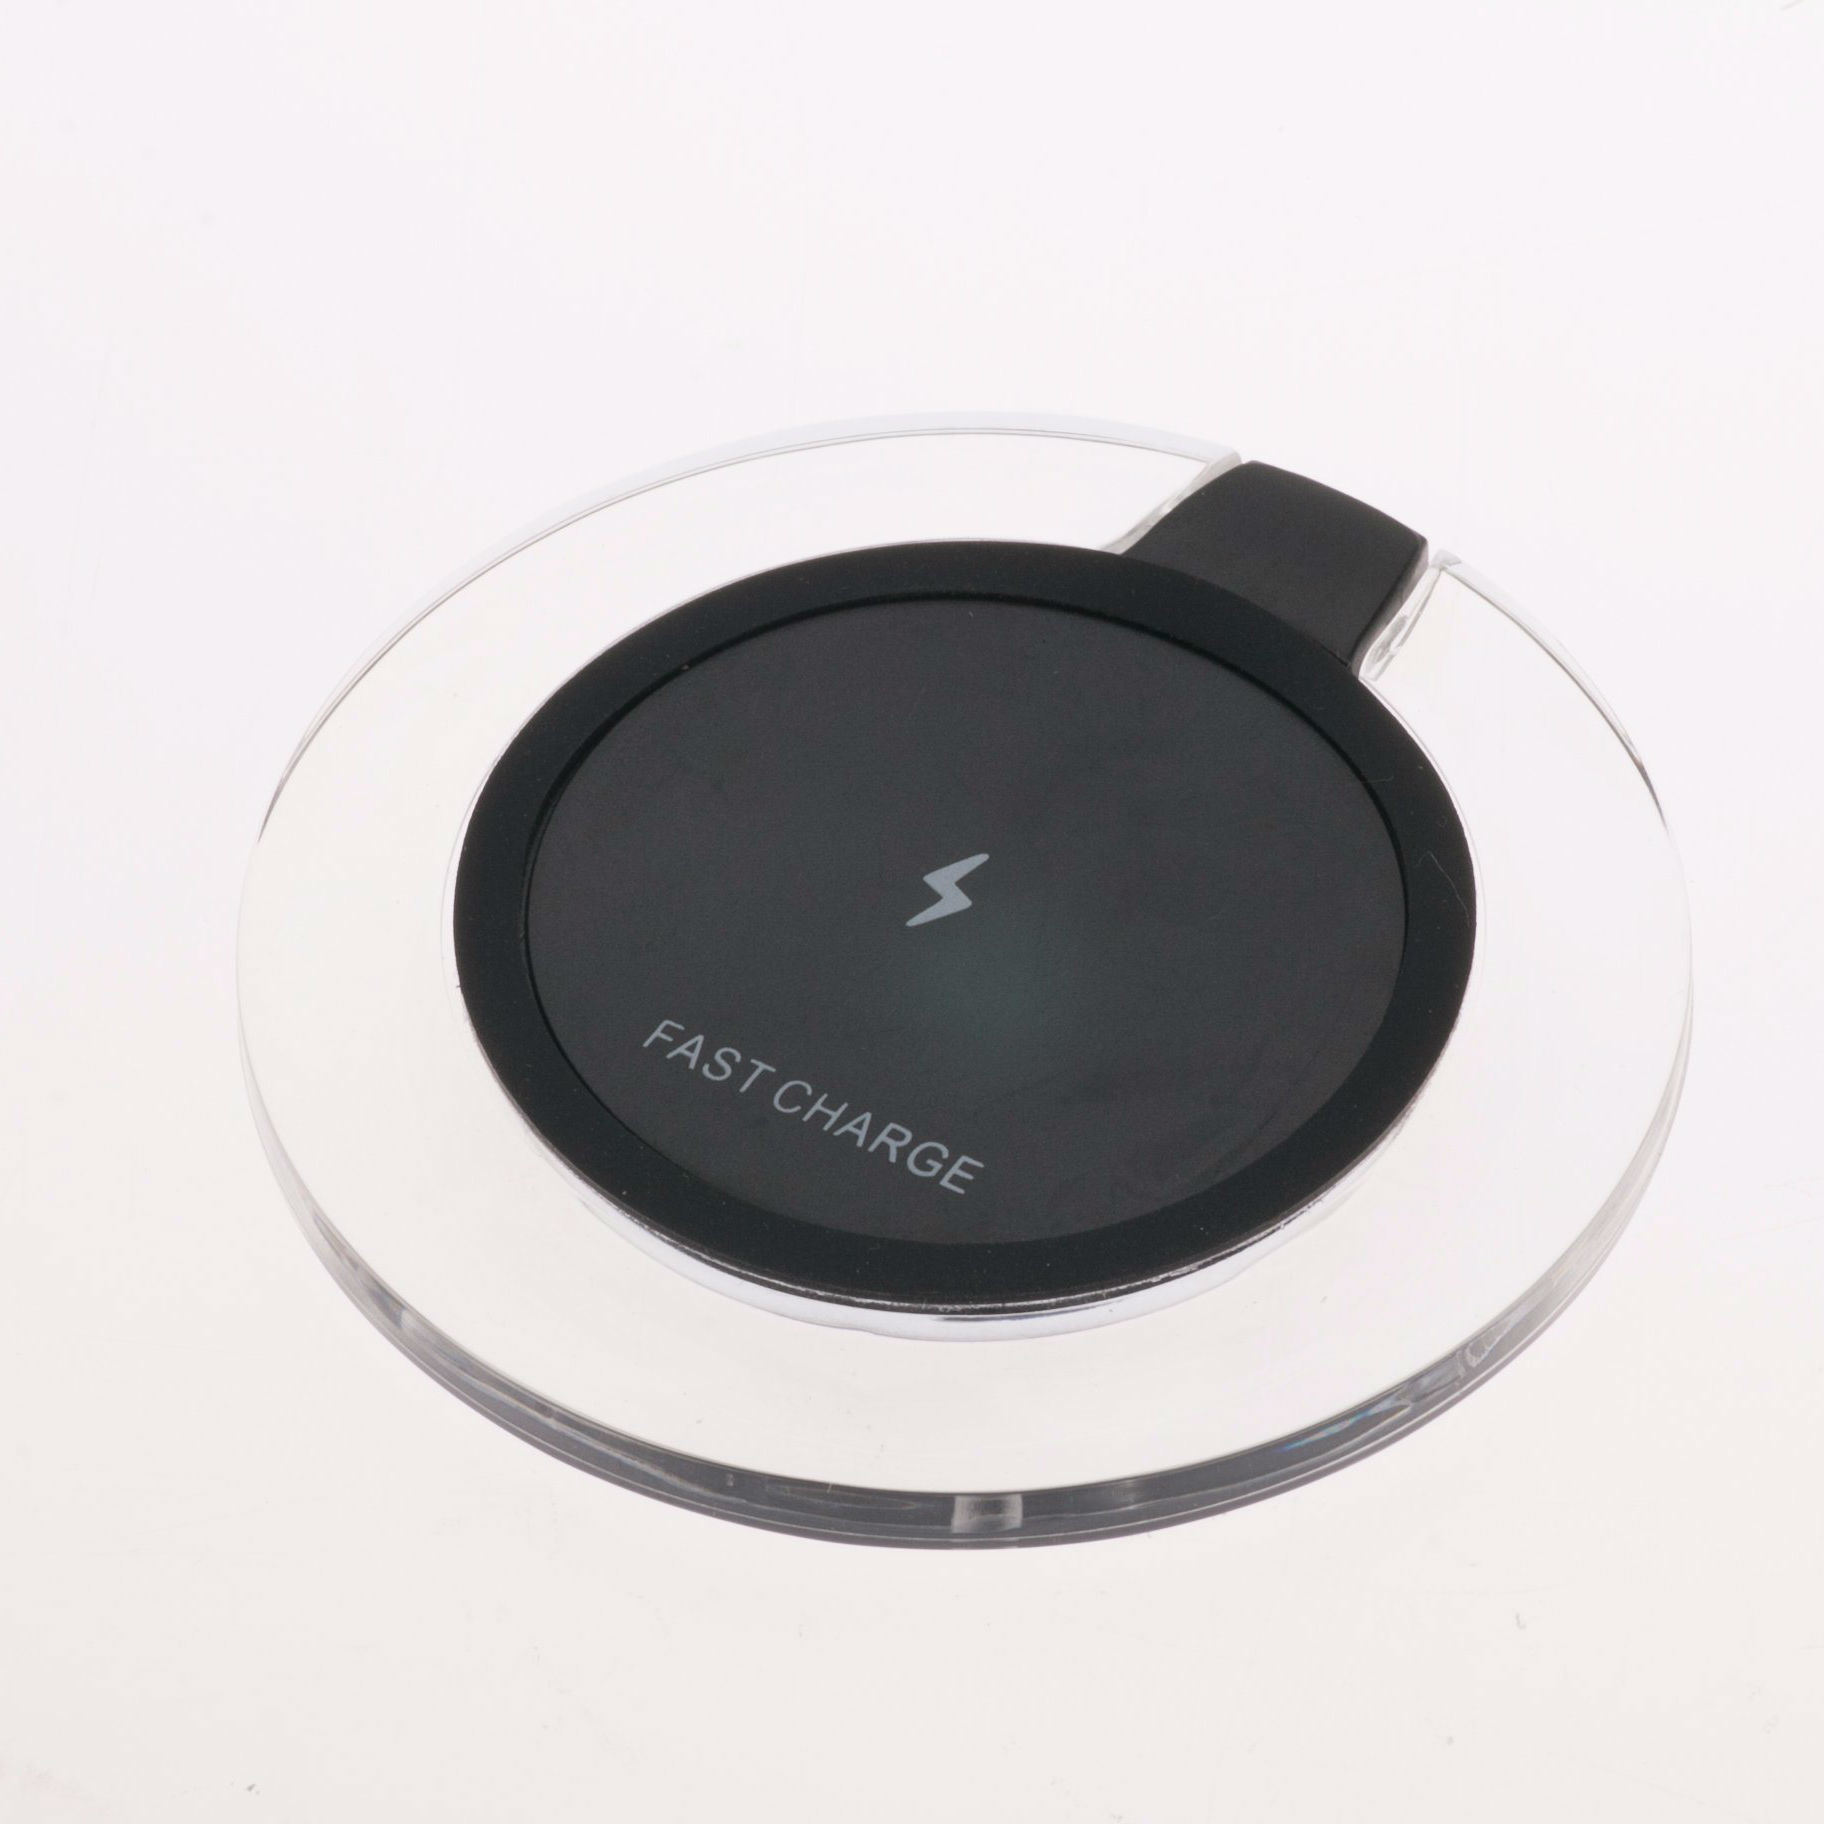 Hot Sale Crystal Qi Standard Wireless Fast Charger